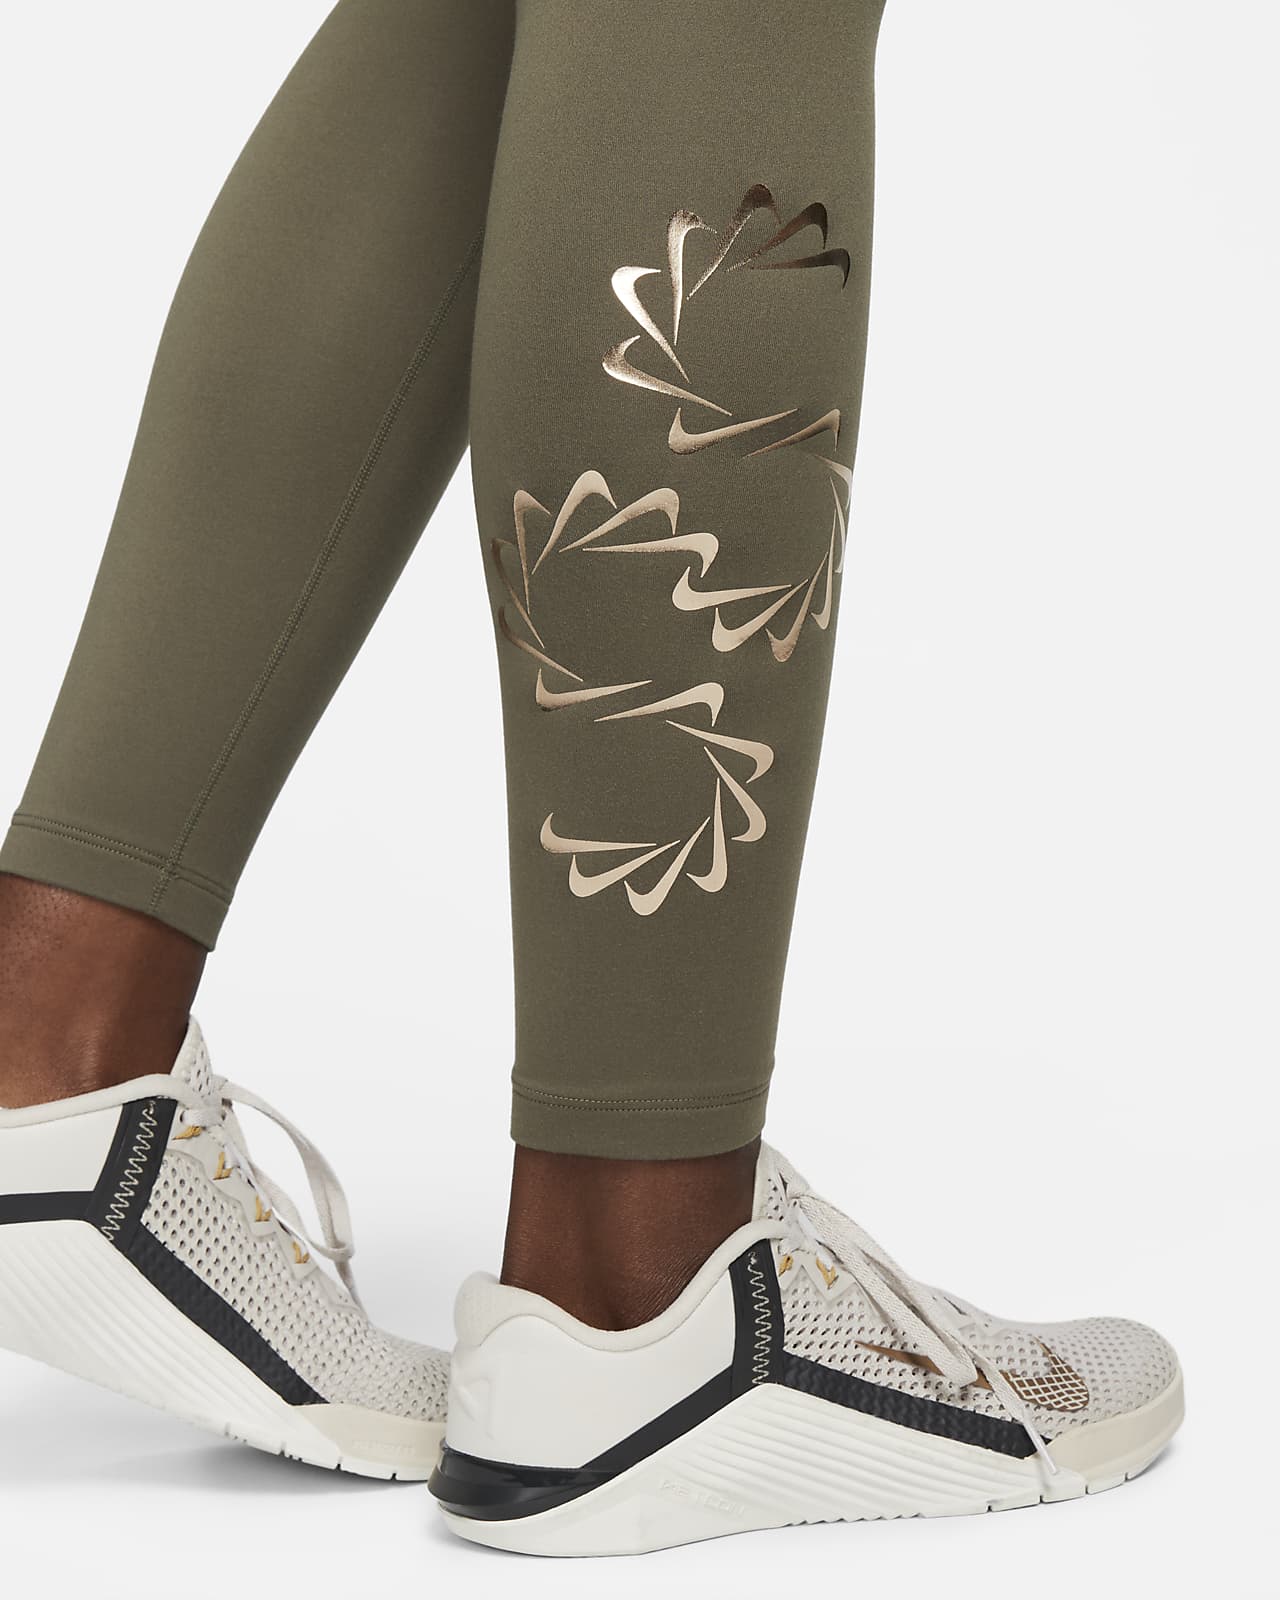 Women's Grey Nike Pro Gym Tights | Life Style Sports